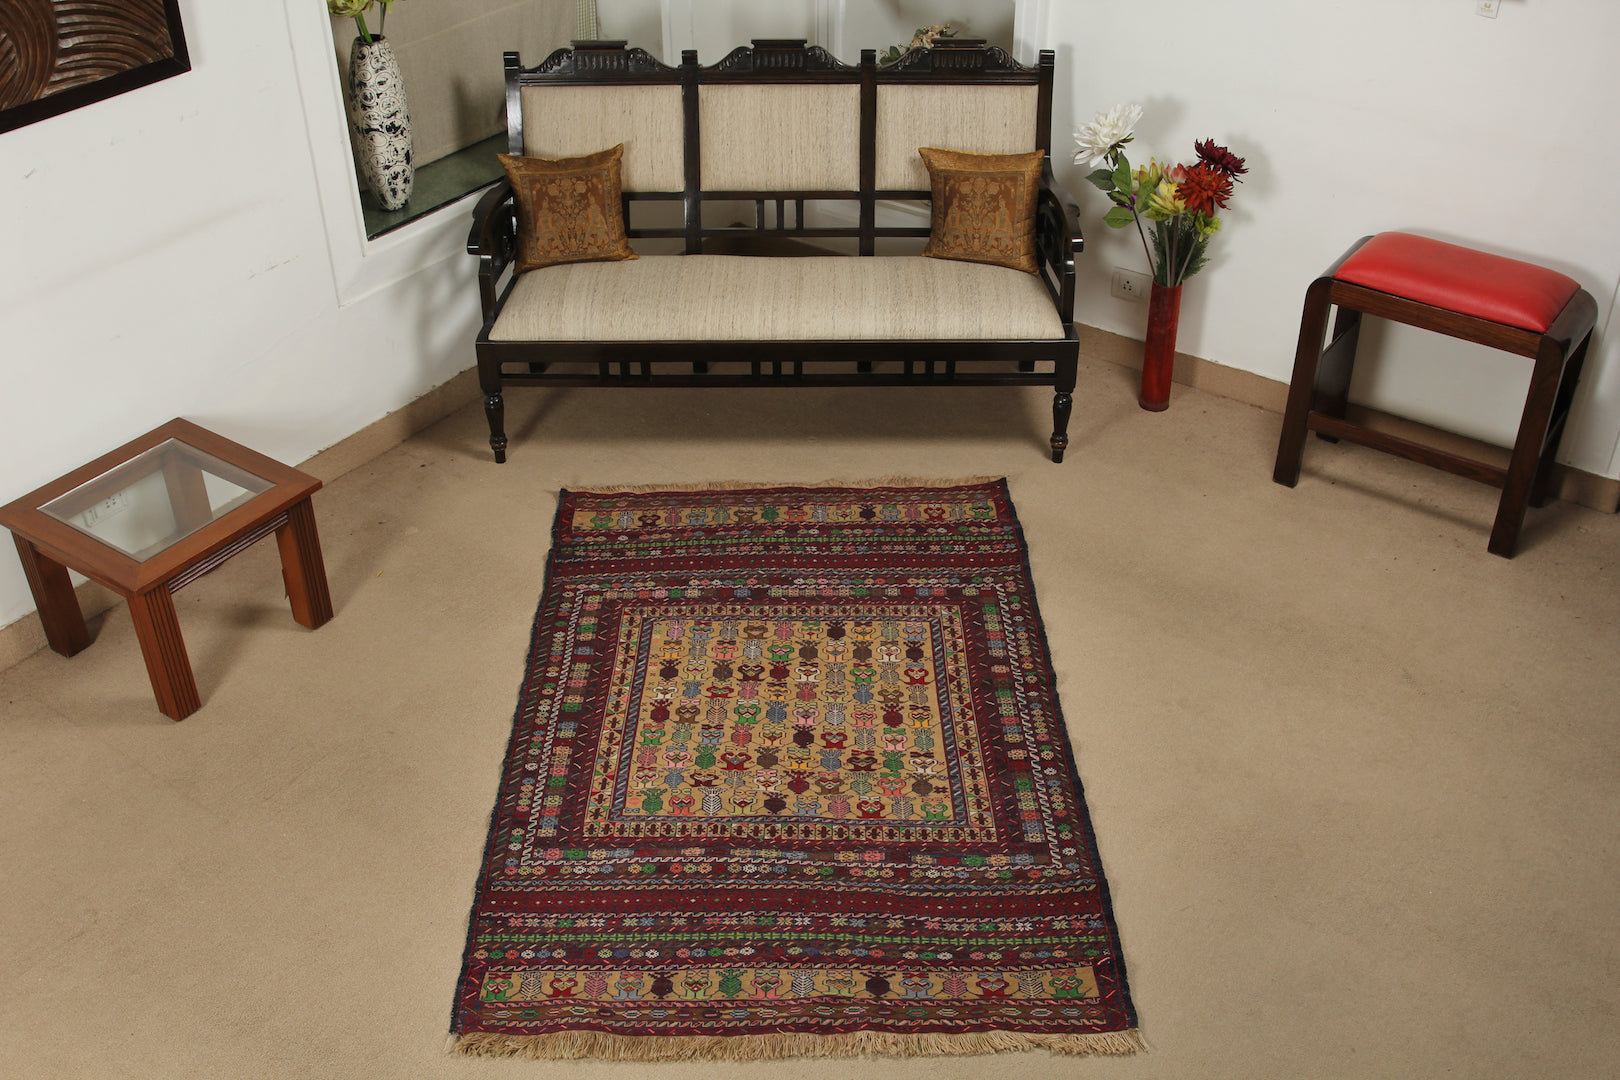 A 4 by 6 feet maliki wool kilim. The colours mainly include green, grey, tan, brick and pink.